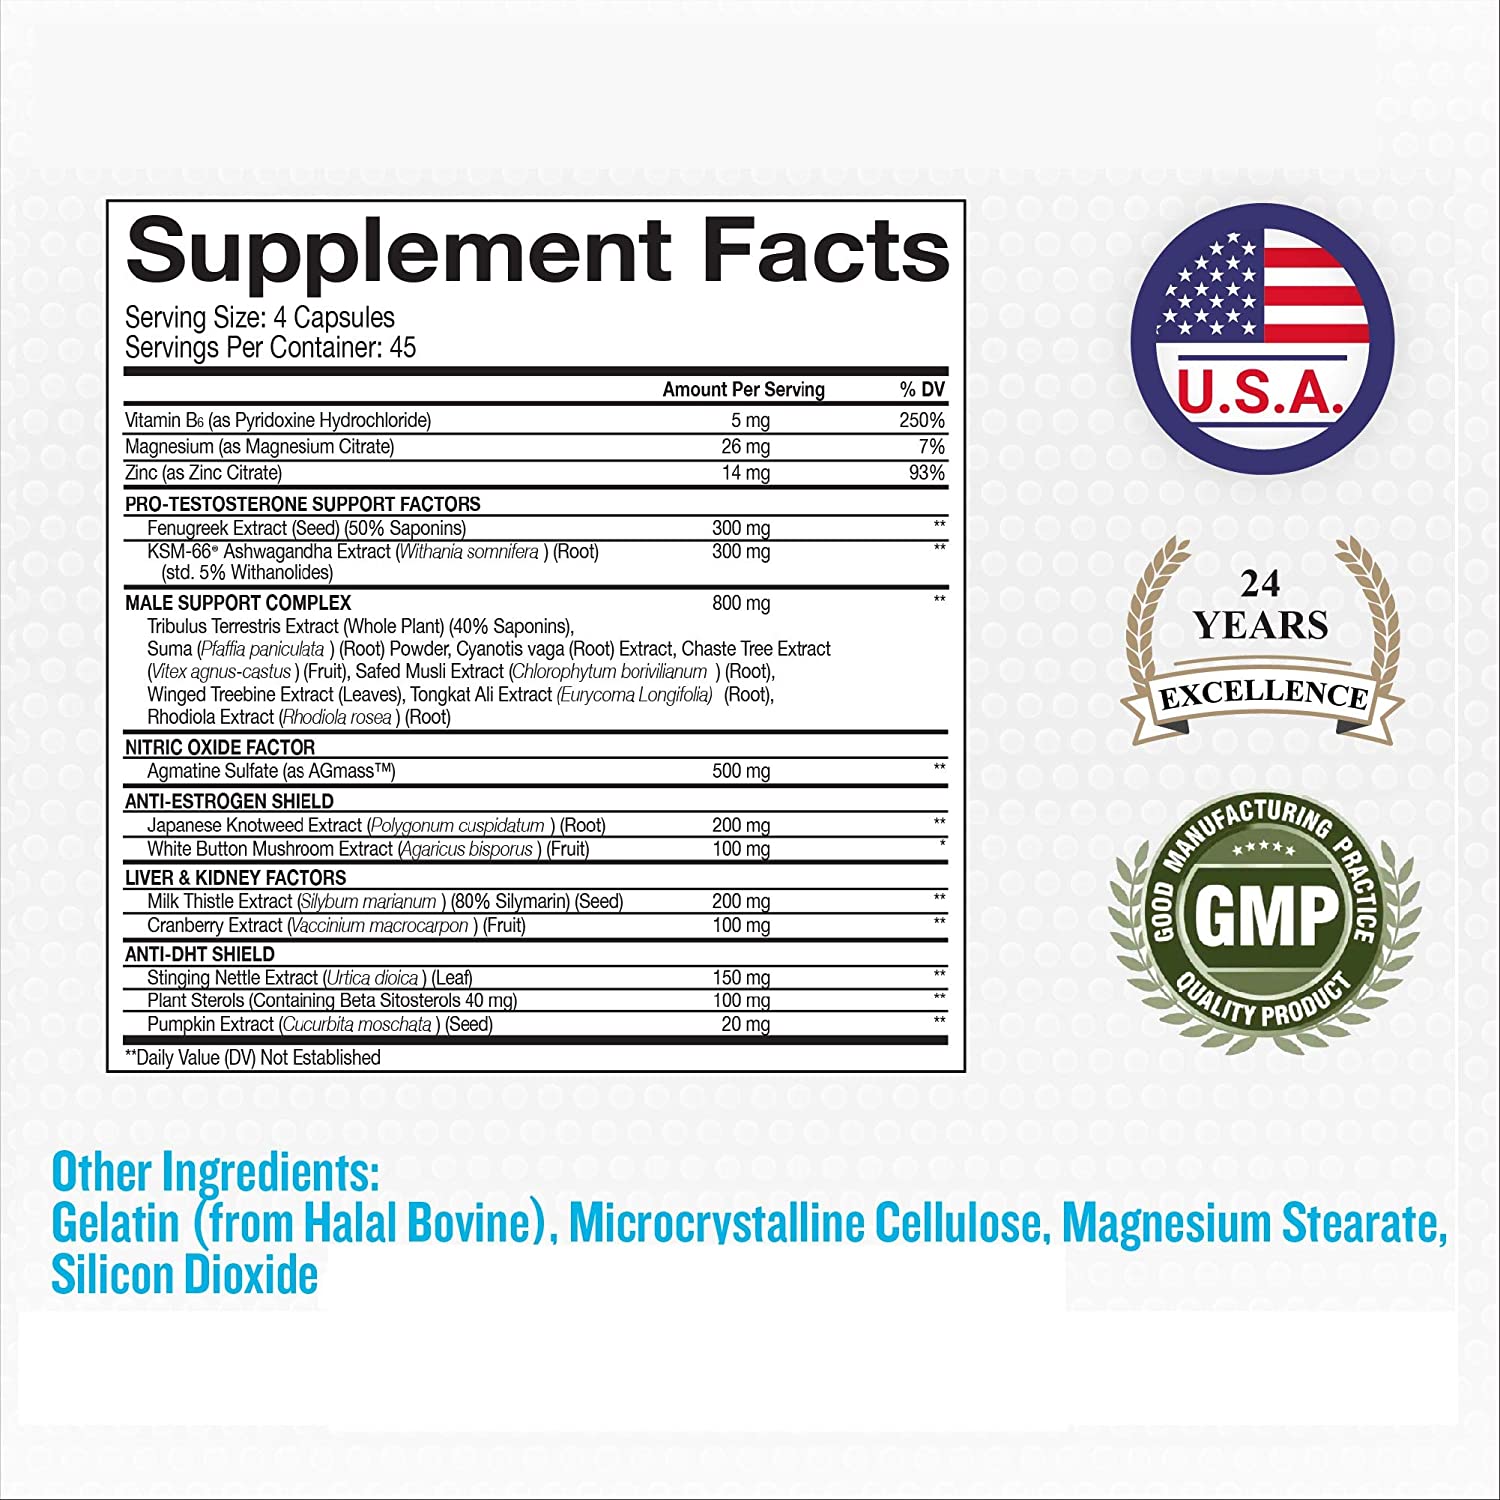 Beast super test ingredients and supplement facts